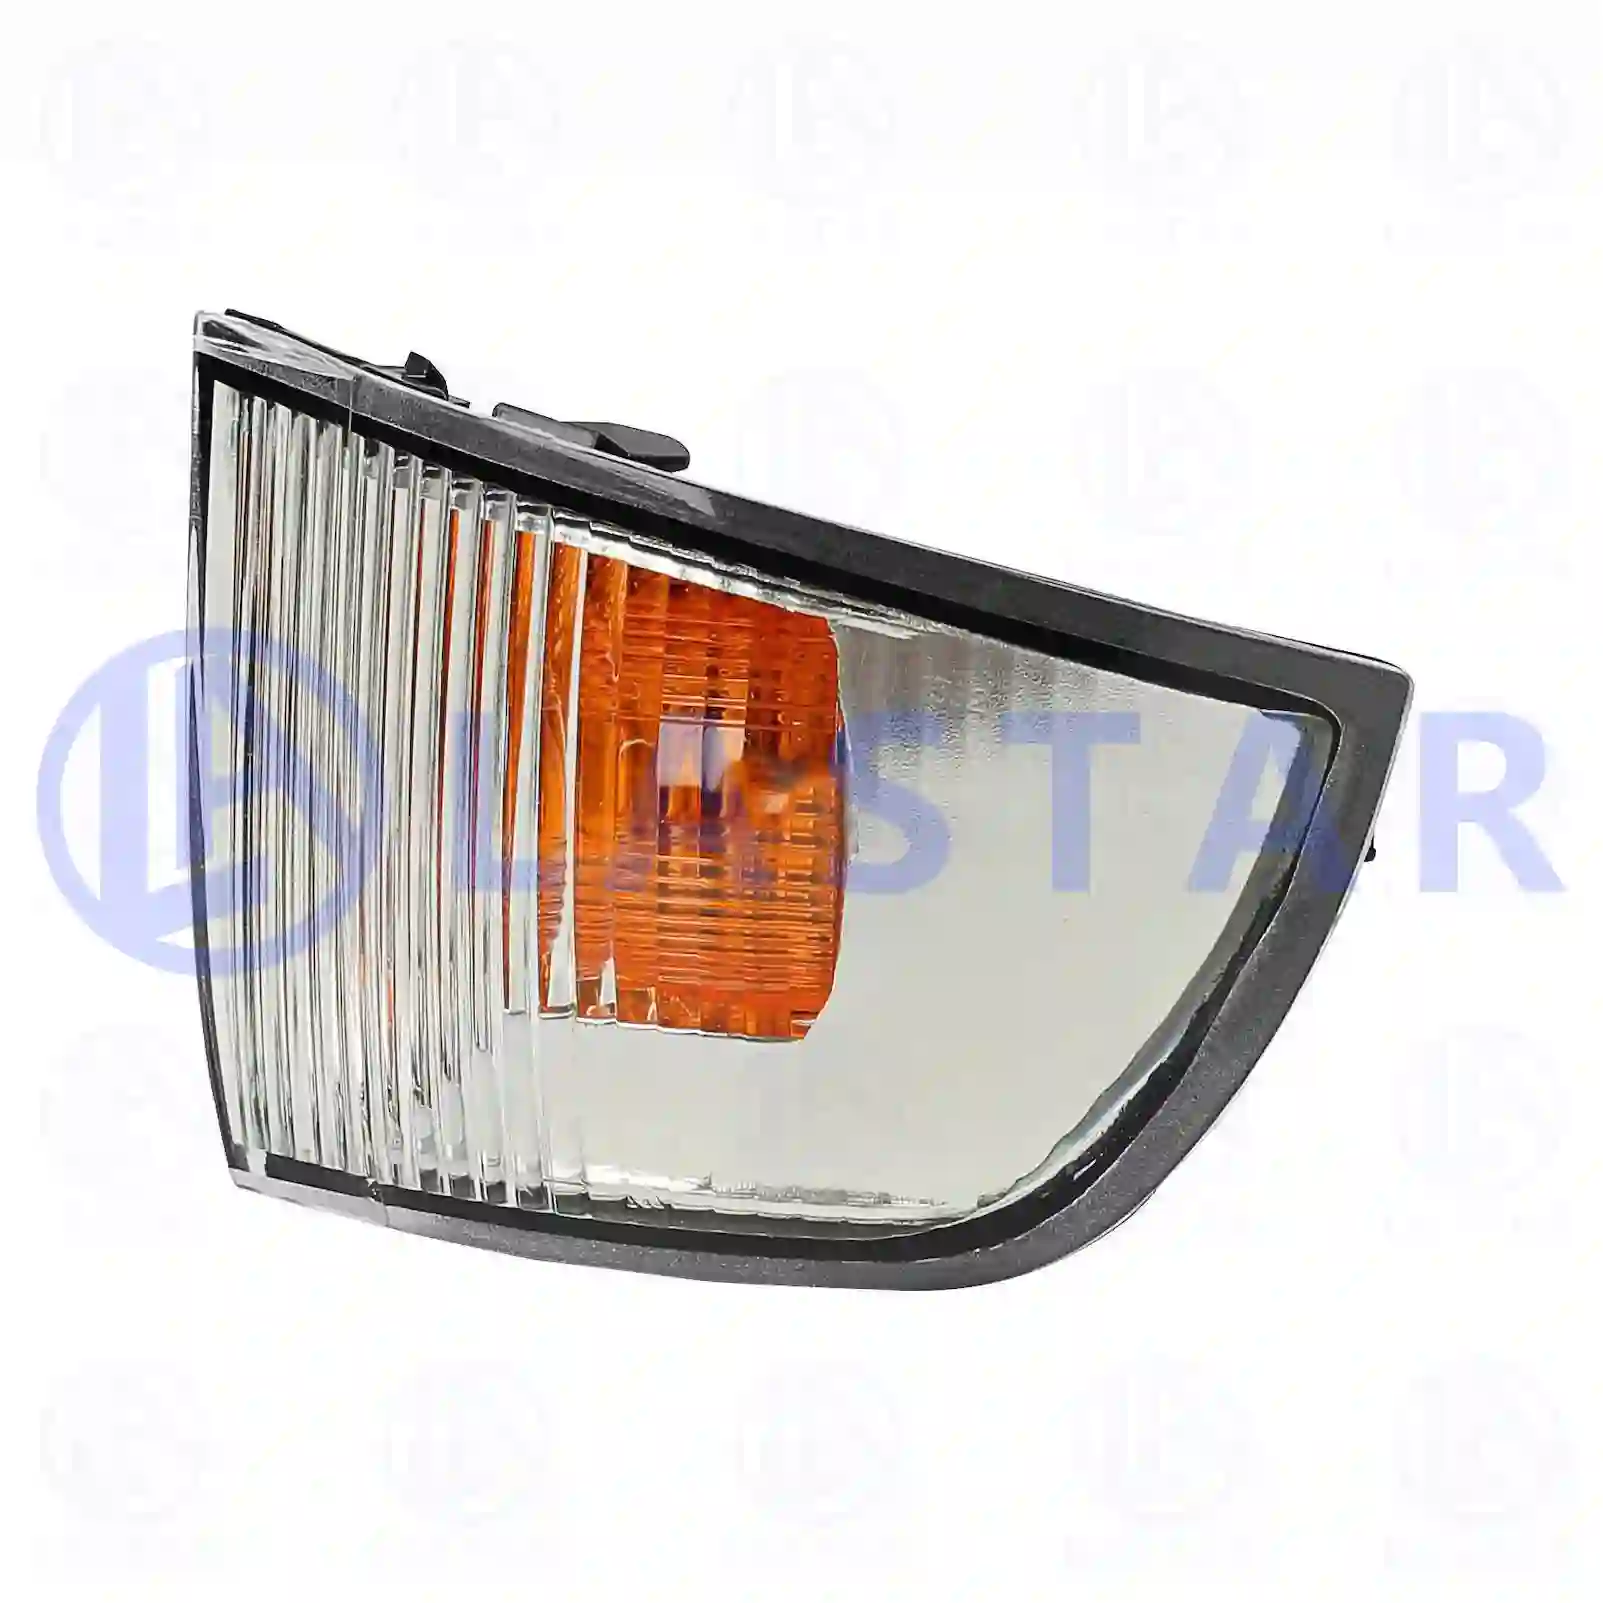 Turn signal lamp, right, without lamp carrier, 77712953, 03801915, 3801915, ZG21238-0008 ||  77712953 Lastar Spare Part | Truck Spare Parts, Auotomotive Spare Parts Turn signal lamp, right, without lamp carrier, 77712953, 03801915, 3801915, ZG21238-0008 ||  77712953 Lastar Spare Part | Truck Spare Parts, Auotomotive Spare Parts